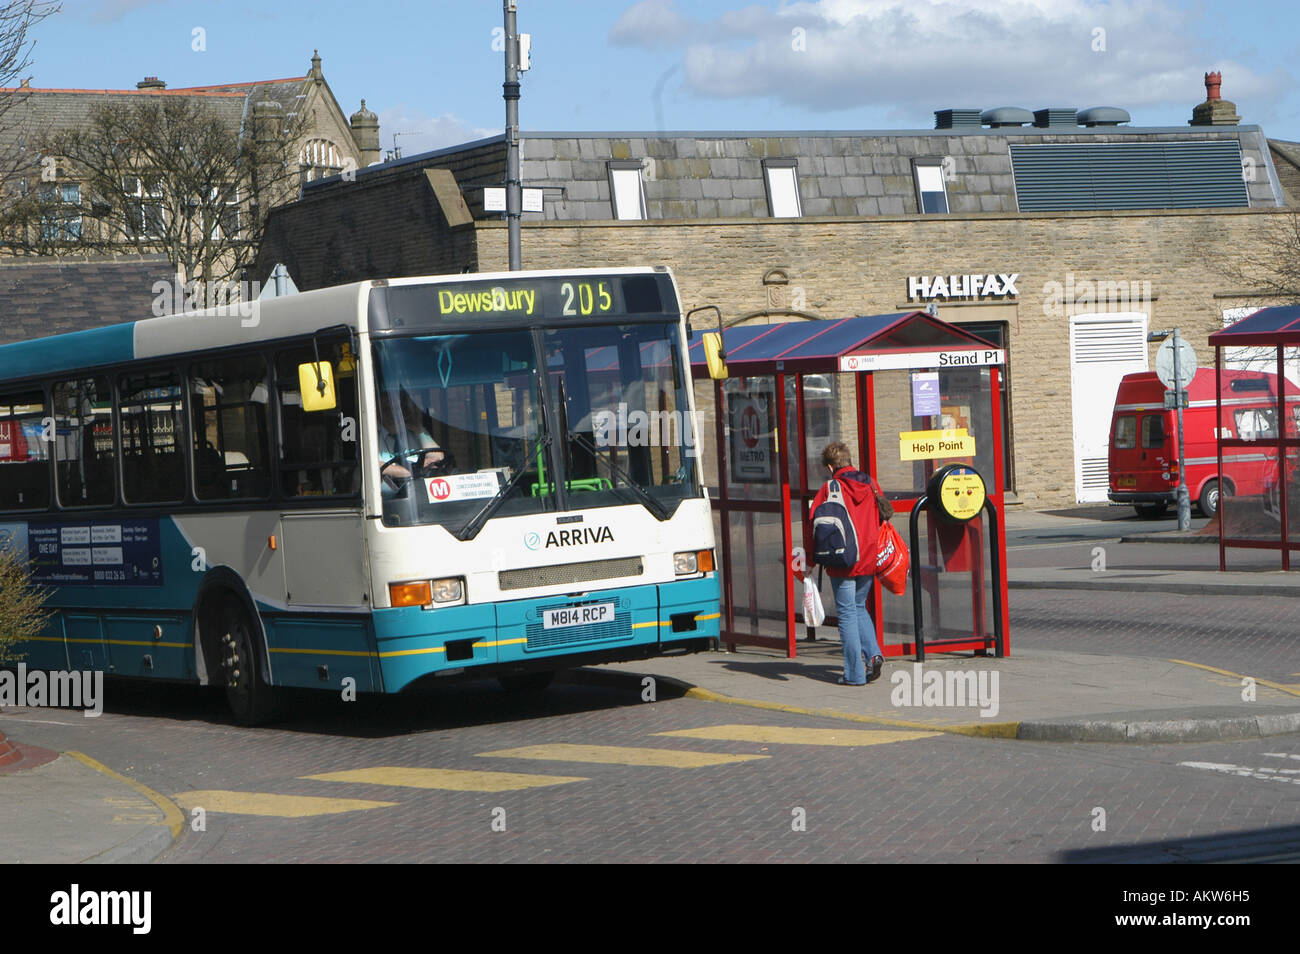 Arriva bus bound for Dewsbury waiting at a bus station in Pudsey North Yorkshire England Stock Photo